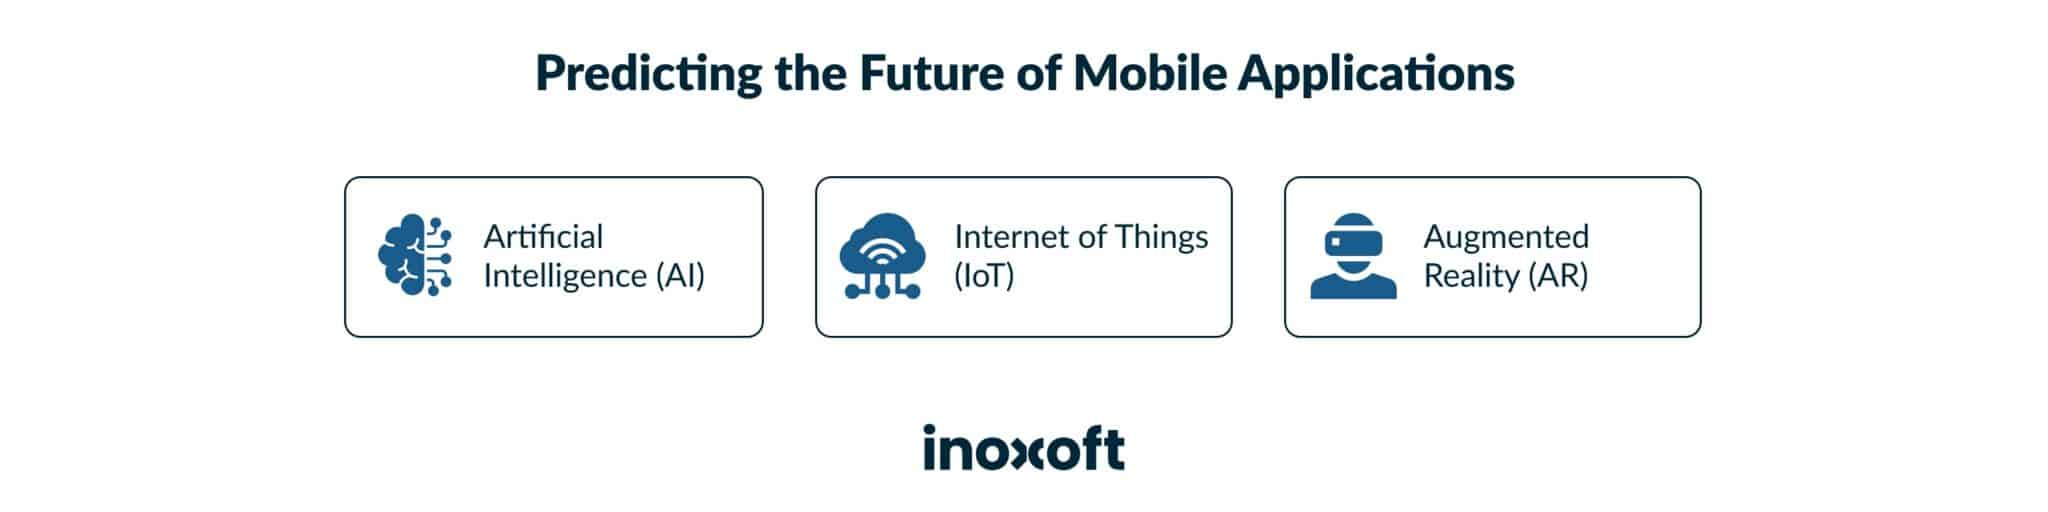 Predicting the Future of Mobile Applications: Artificial intelligence (AI), Internet of things (IoT) & Augmented reality (AR)